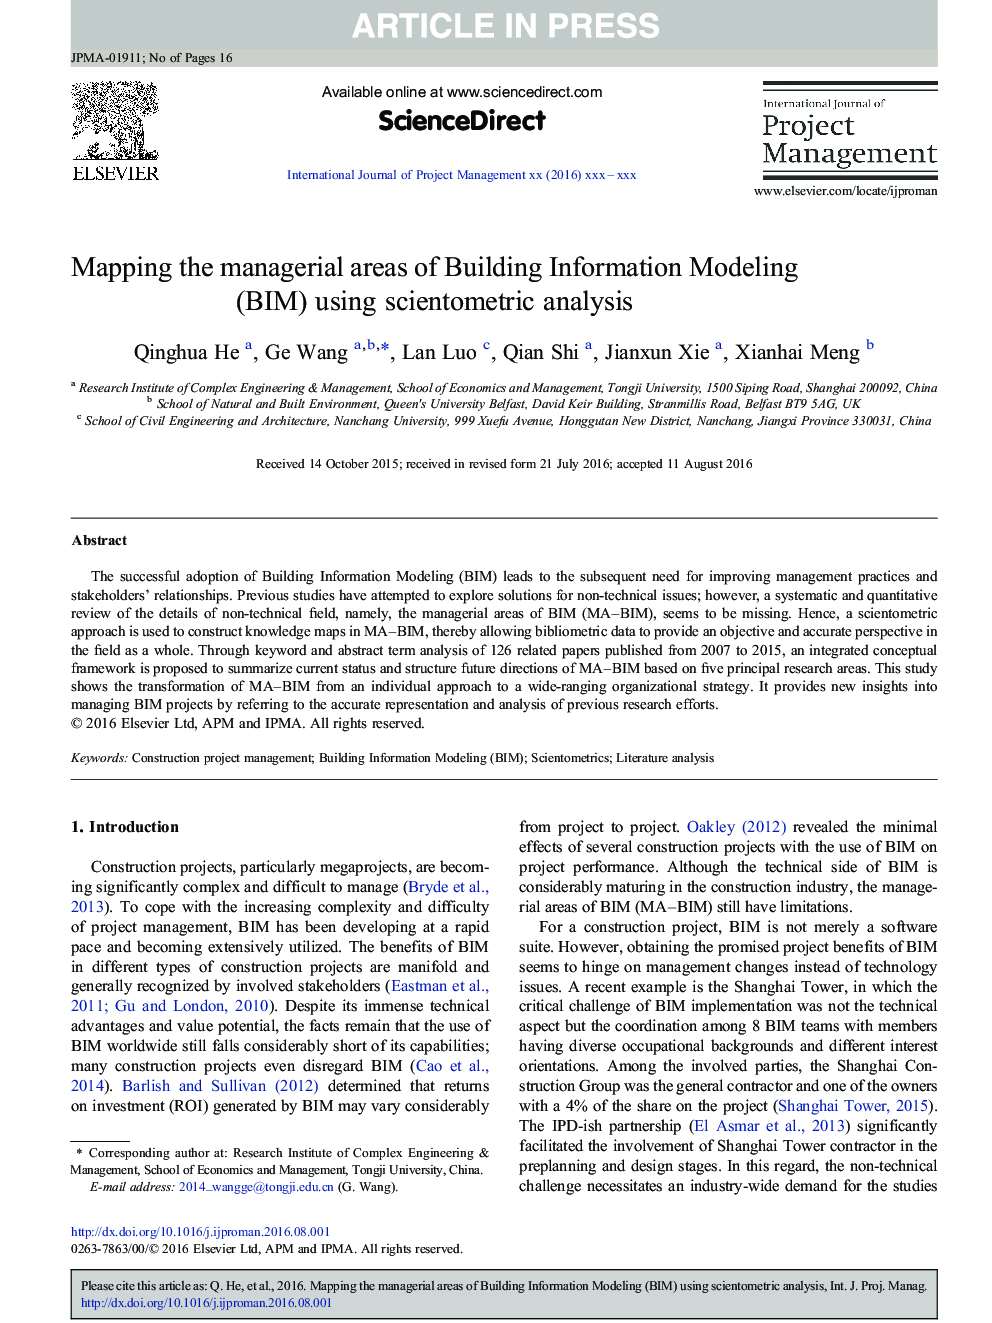 Mapping the managerial areas of Building Information Modeling (BIM) using scientometric analysis